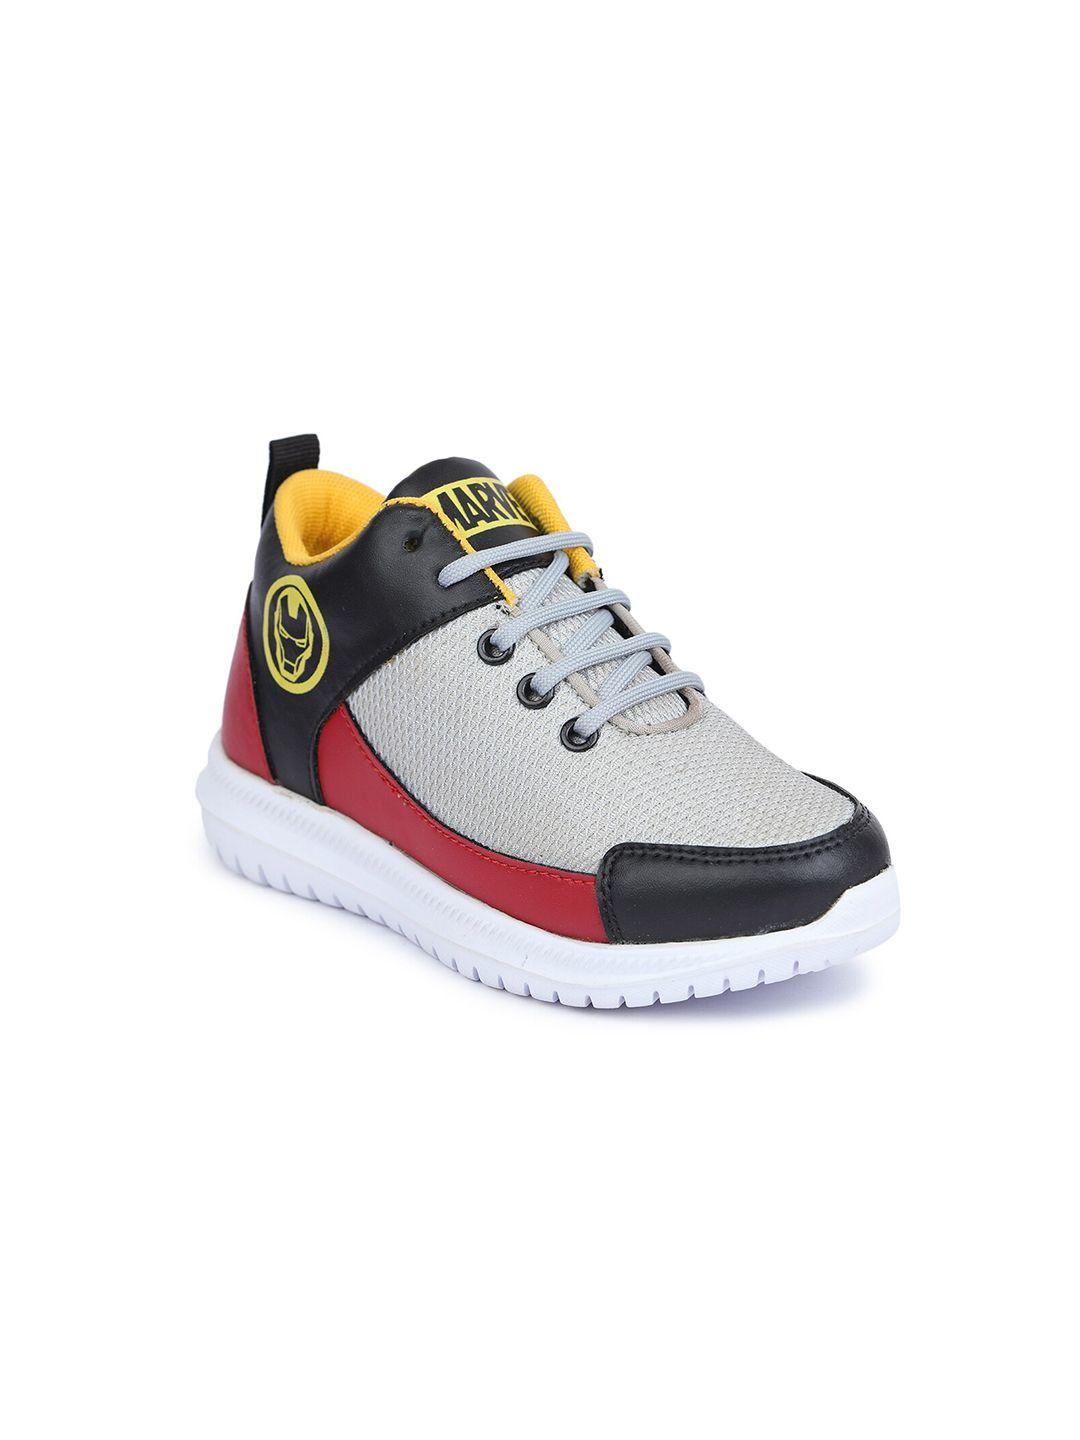 toothless boys red mesh walking shoes